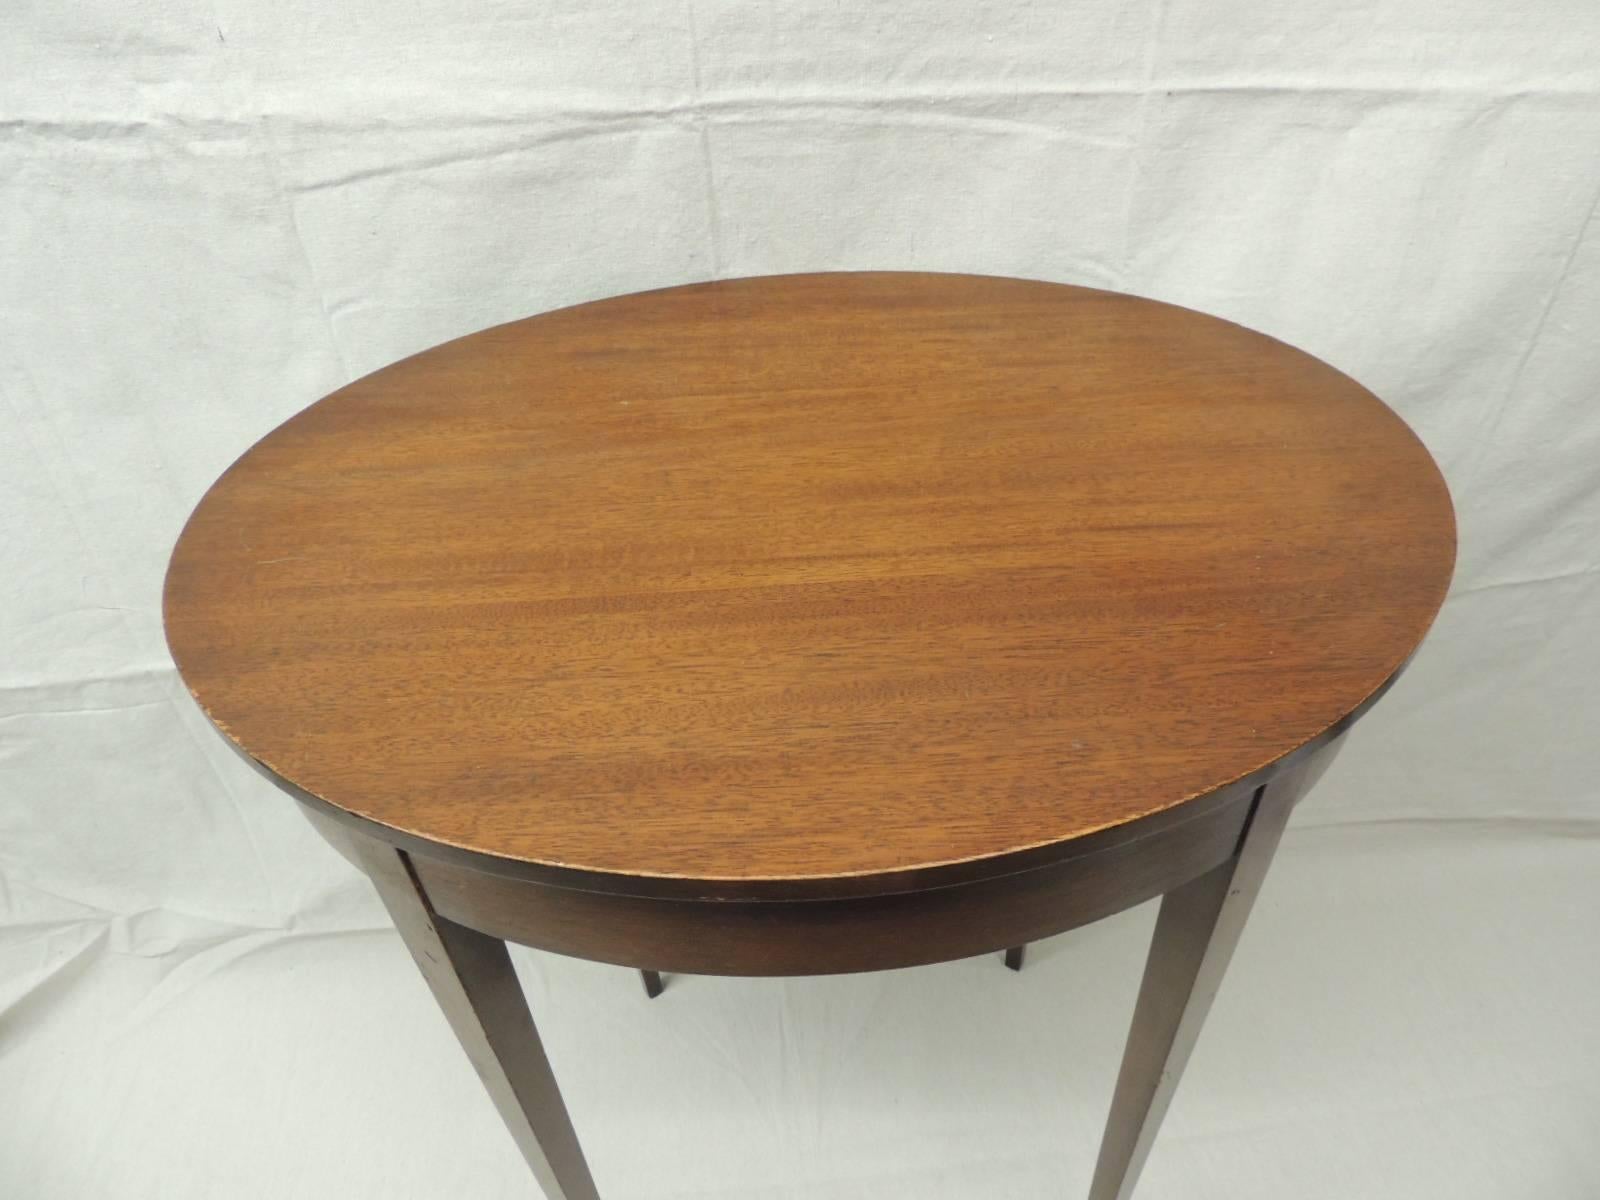 Vintage oval wood side table with square tapered legs. Original company labels.
Imperial’s primary product was tables, with the addition of bookcases to its line later in its history. Foote laid claim to inventing the “coffee table” after he helped